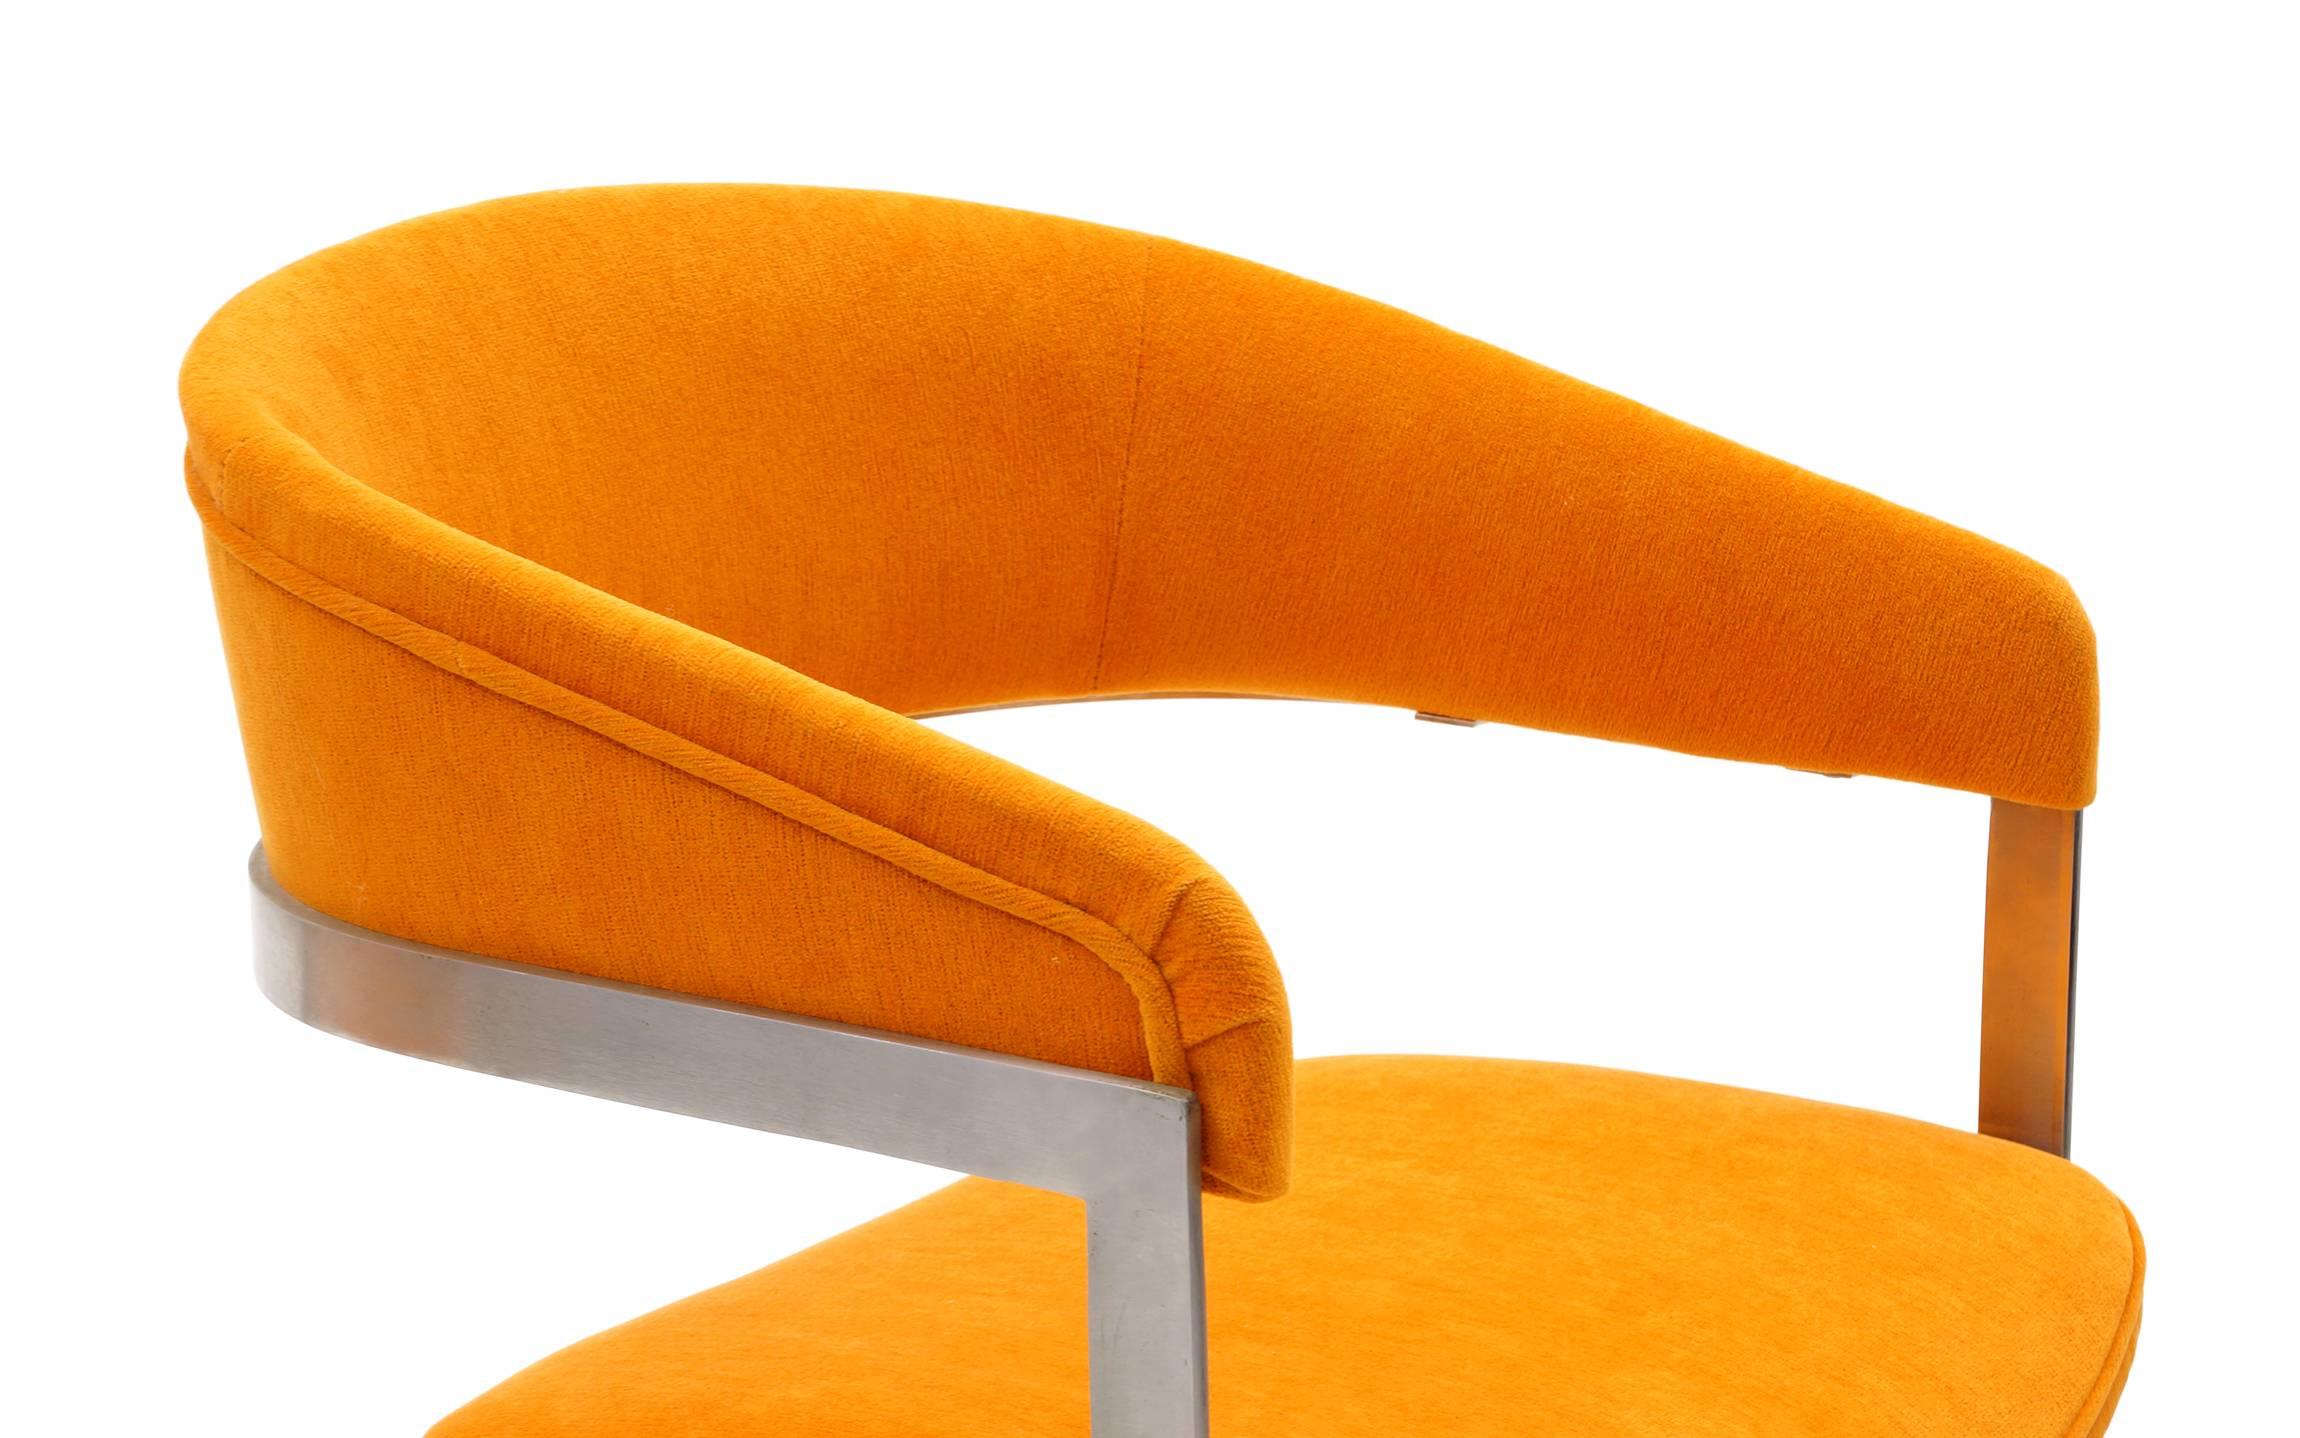 Late 20th Century Milo Baughman Style Occasional Chairs, Brushed Steel and Orange, Excellent